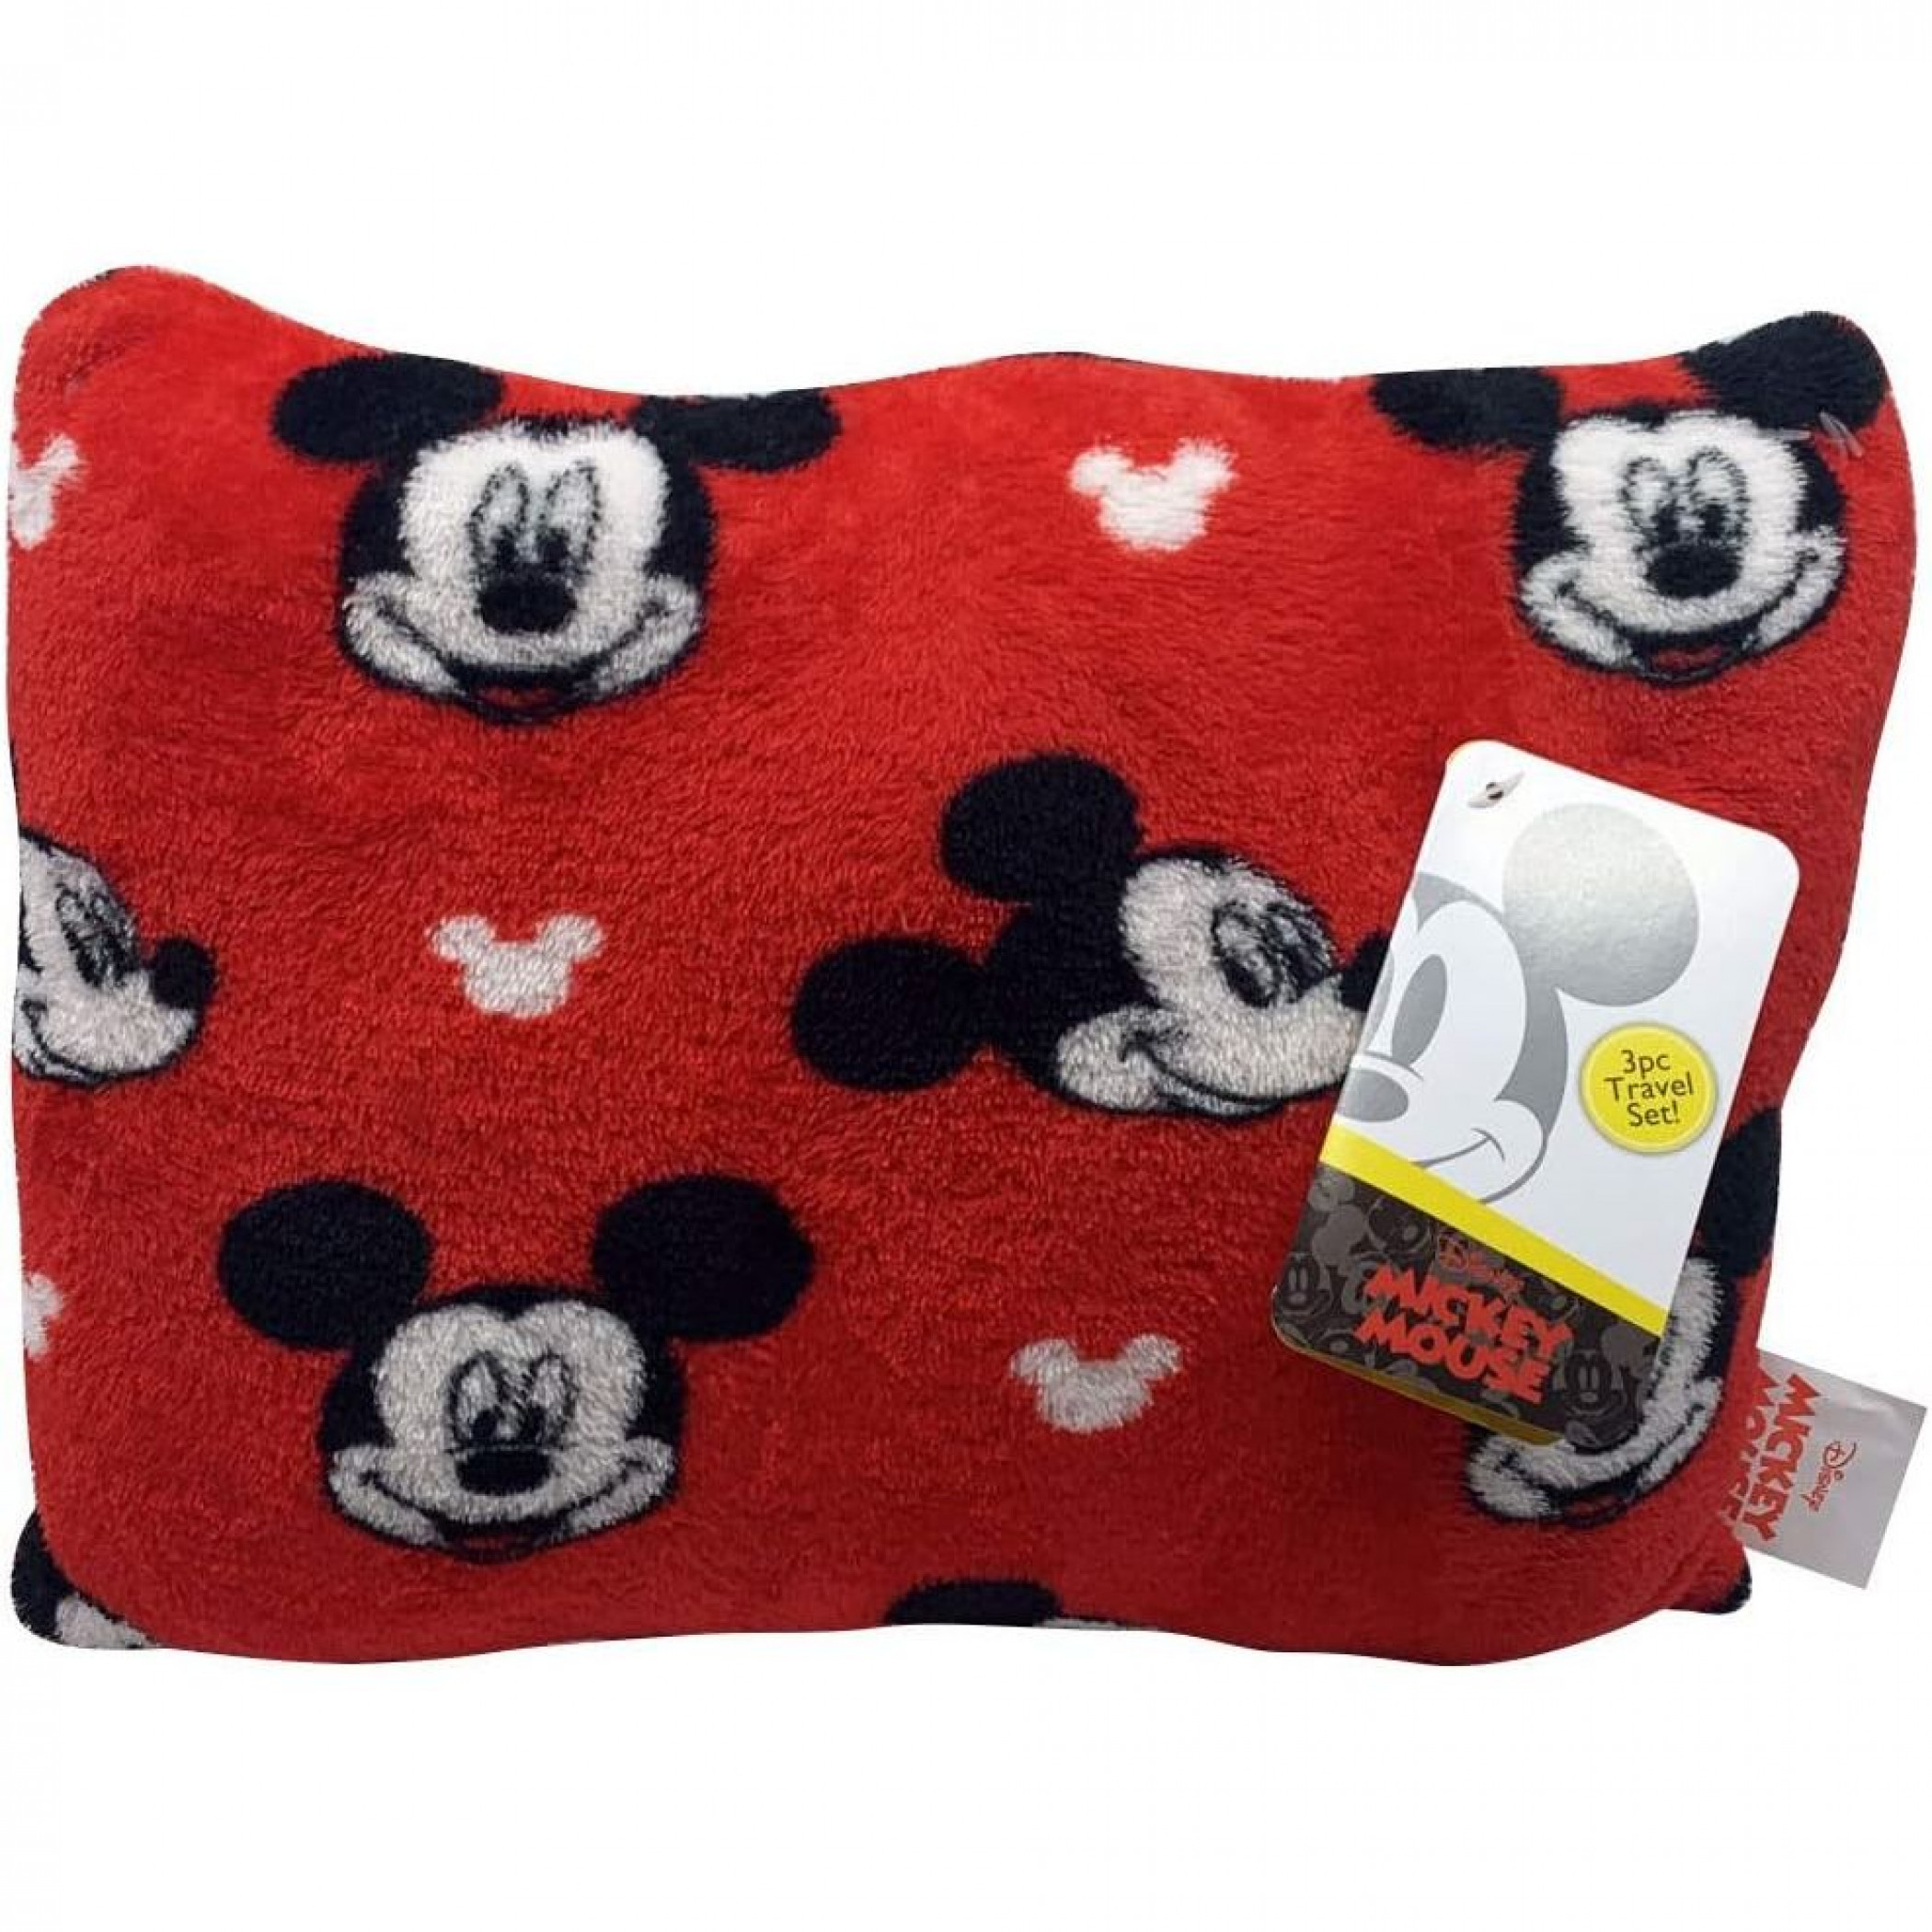 Mickey Mouse 3 Piece Kids Travel Set Includes Blanket, Pillow, & Plush